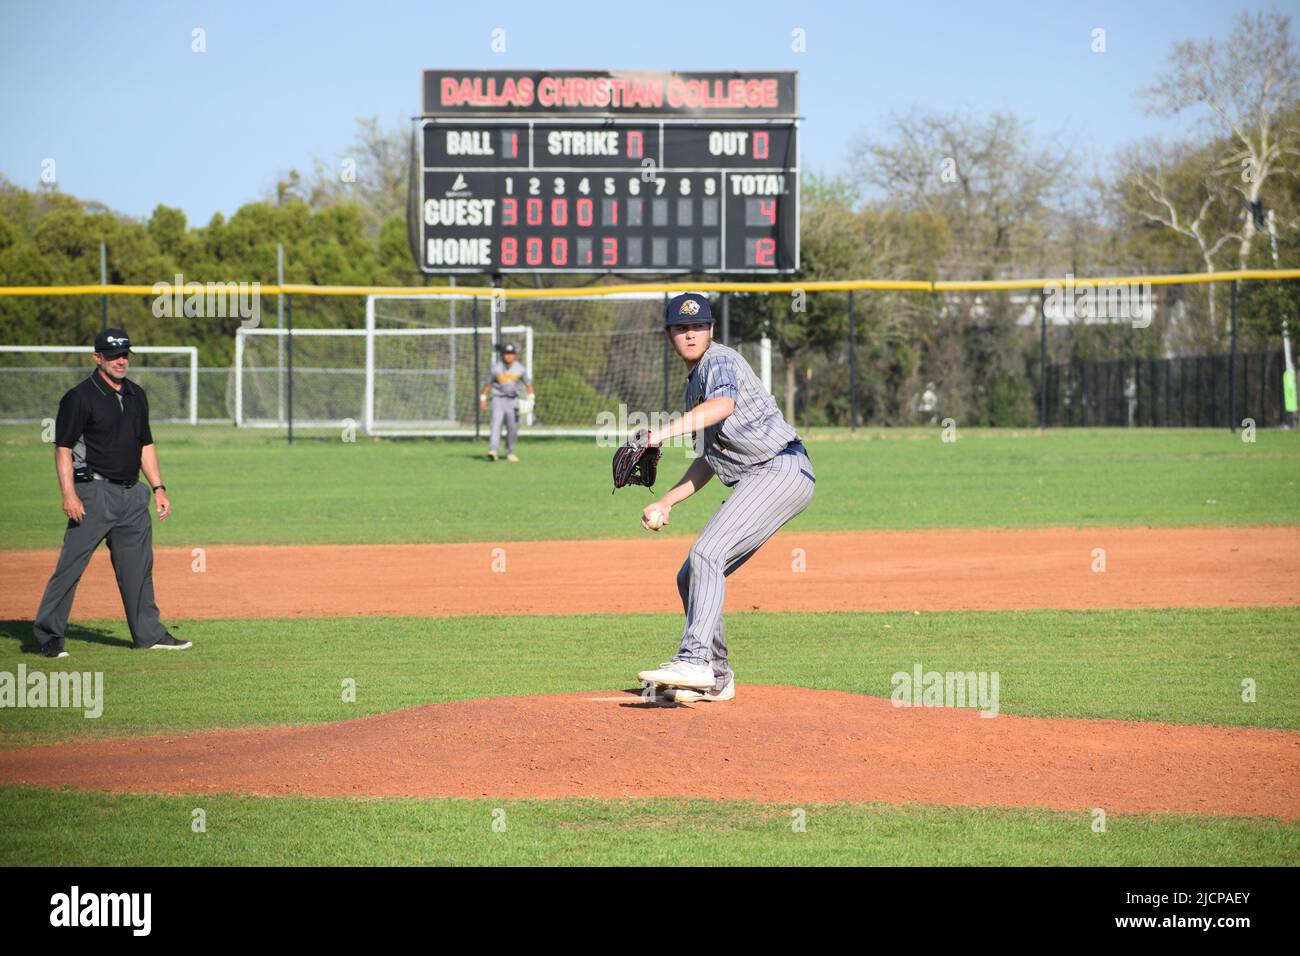 An Ecclesia College pitcher on the mound at a game against Dallas Christian College Stock Photo